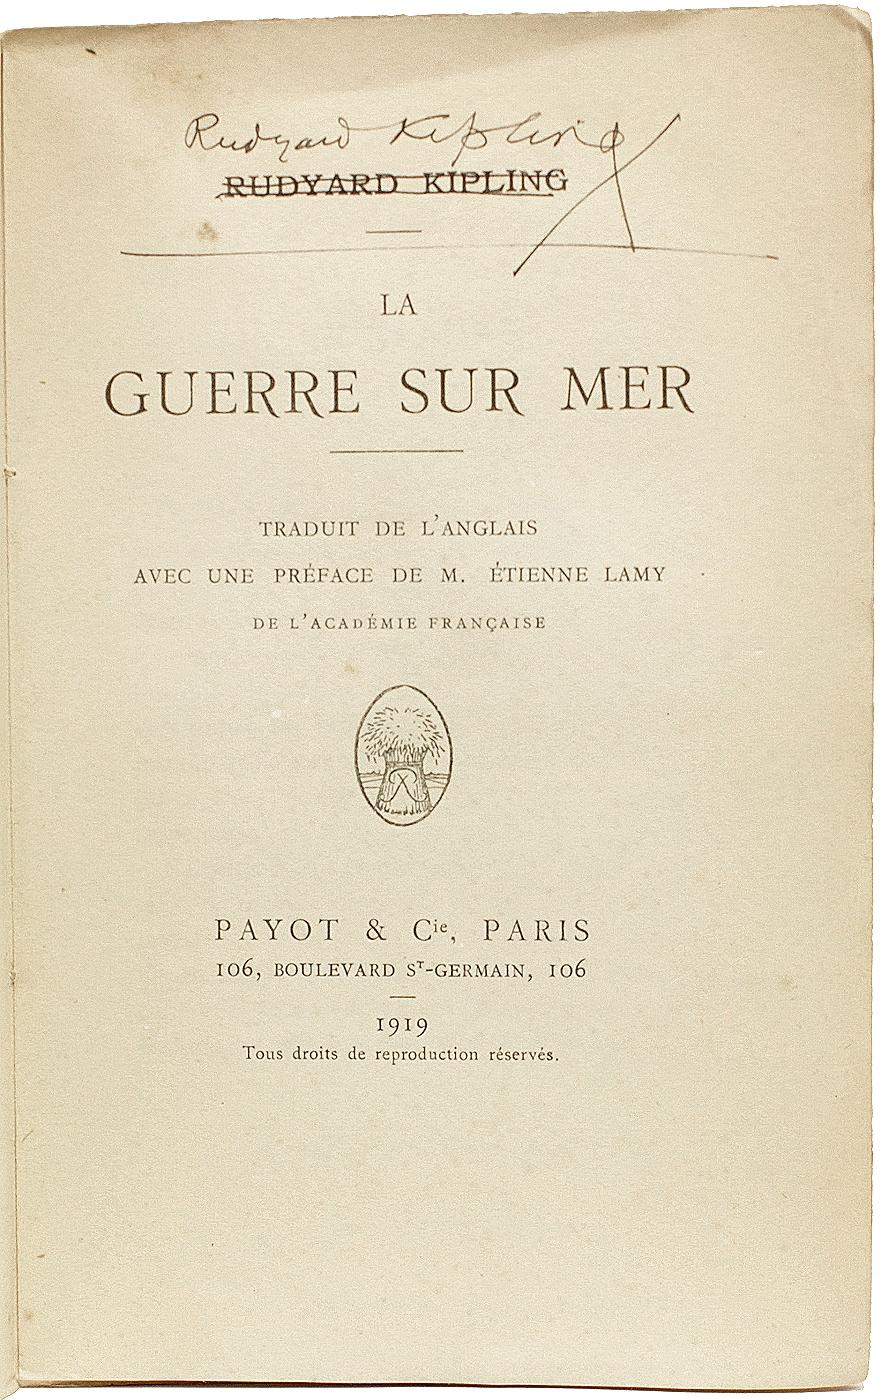 AUTHOR: KIPLING, Rudyard. 

TITLE: La Guerre Sur Mer.

PUBLISHER: Paris: Payot et Cie, 1919.

DESCRIPTION: FIRST FRENCH EDITION SIGNED. 1 vol., signed by Kipling above his name on the title-page, bound in the publisher's original printed paper